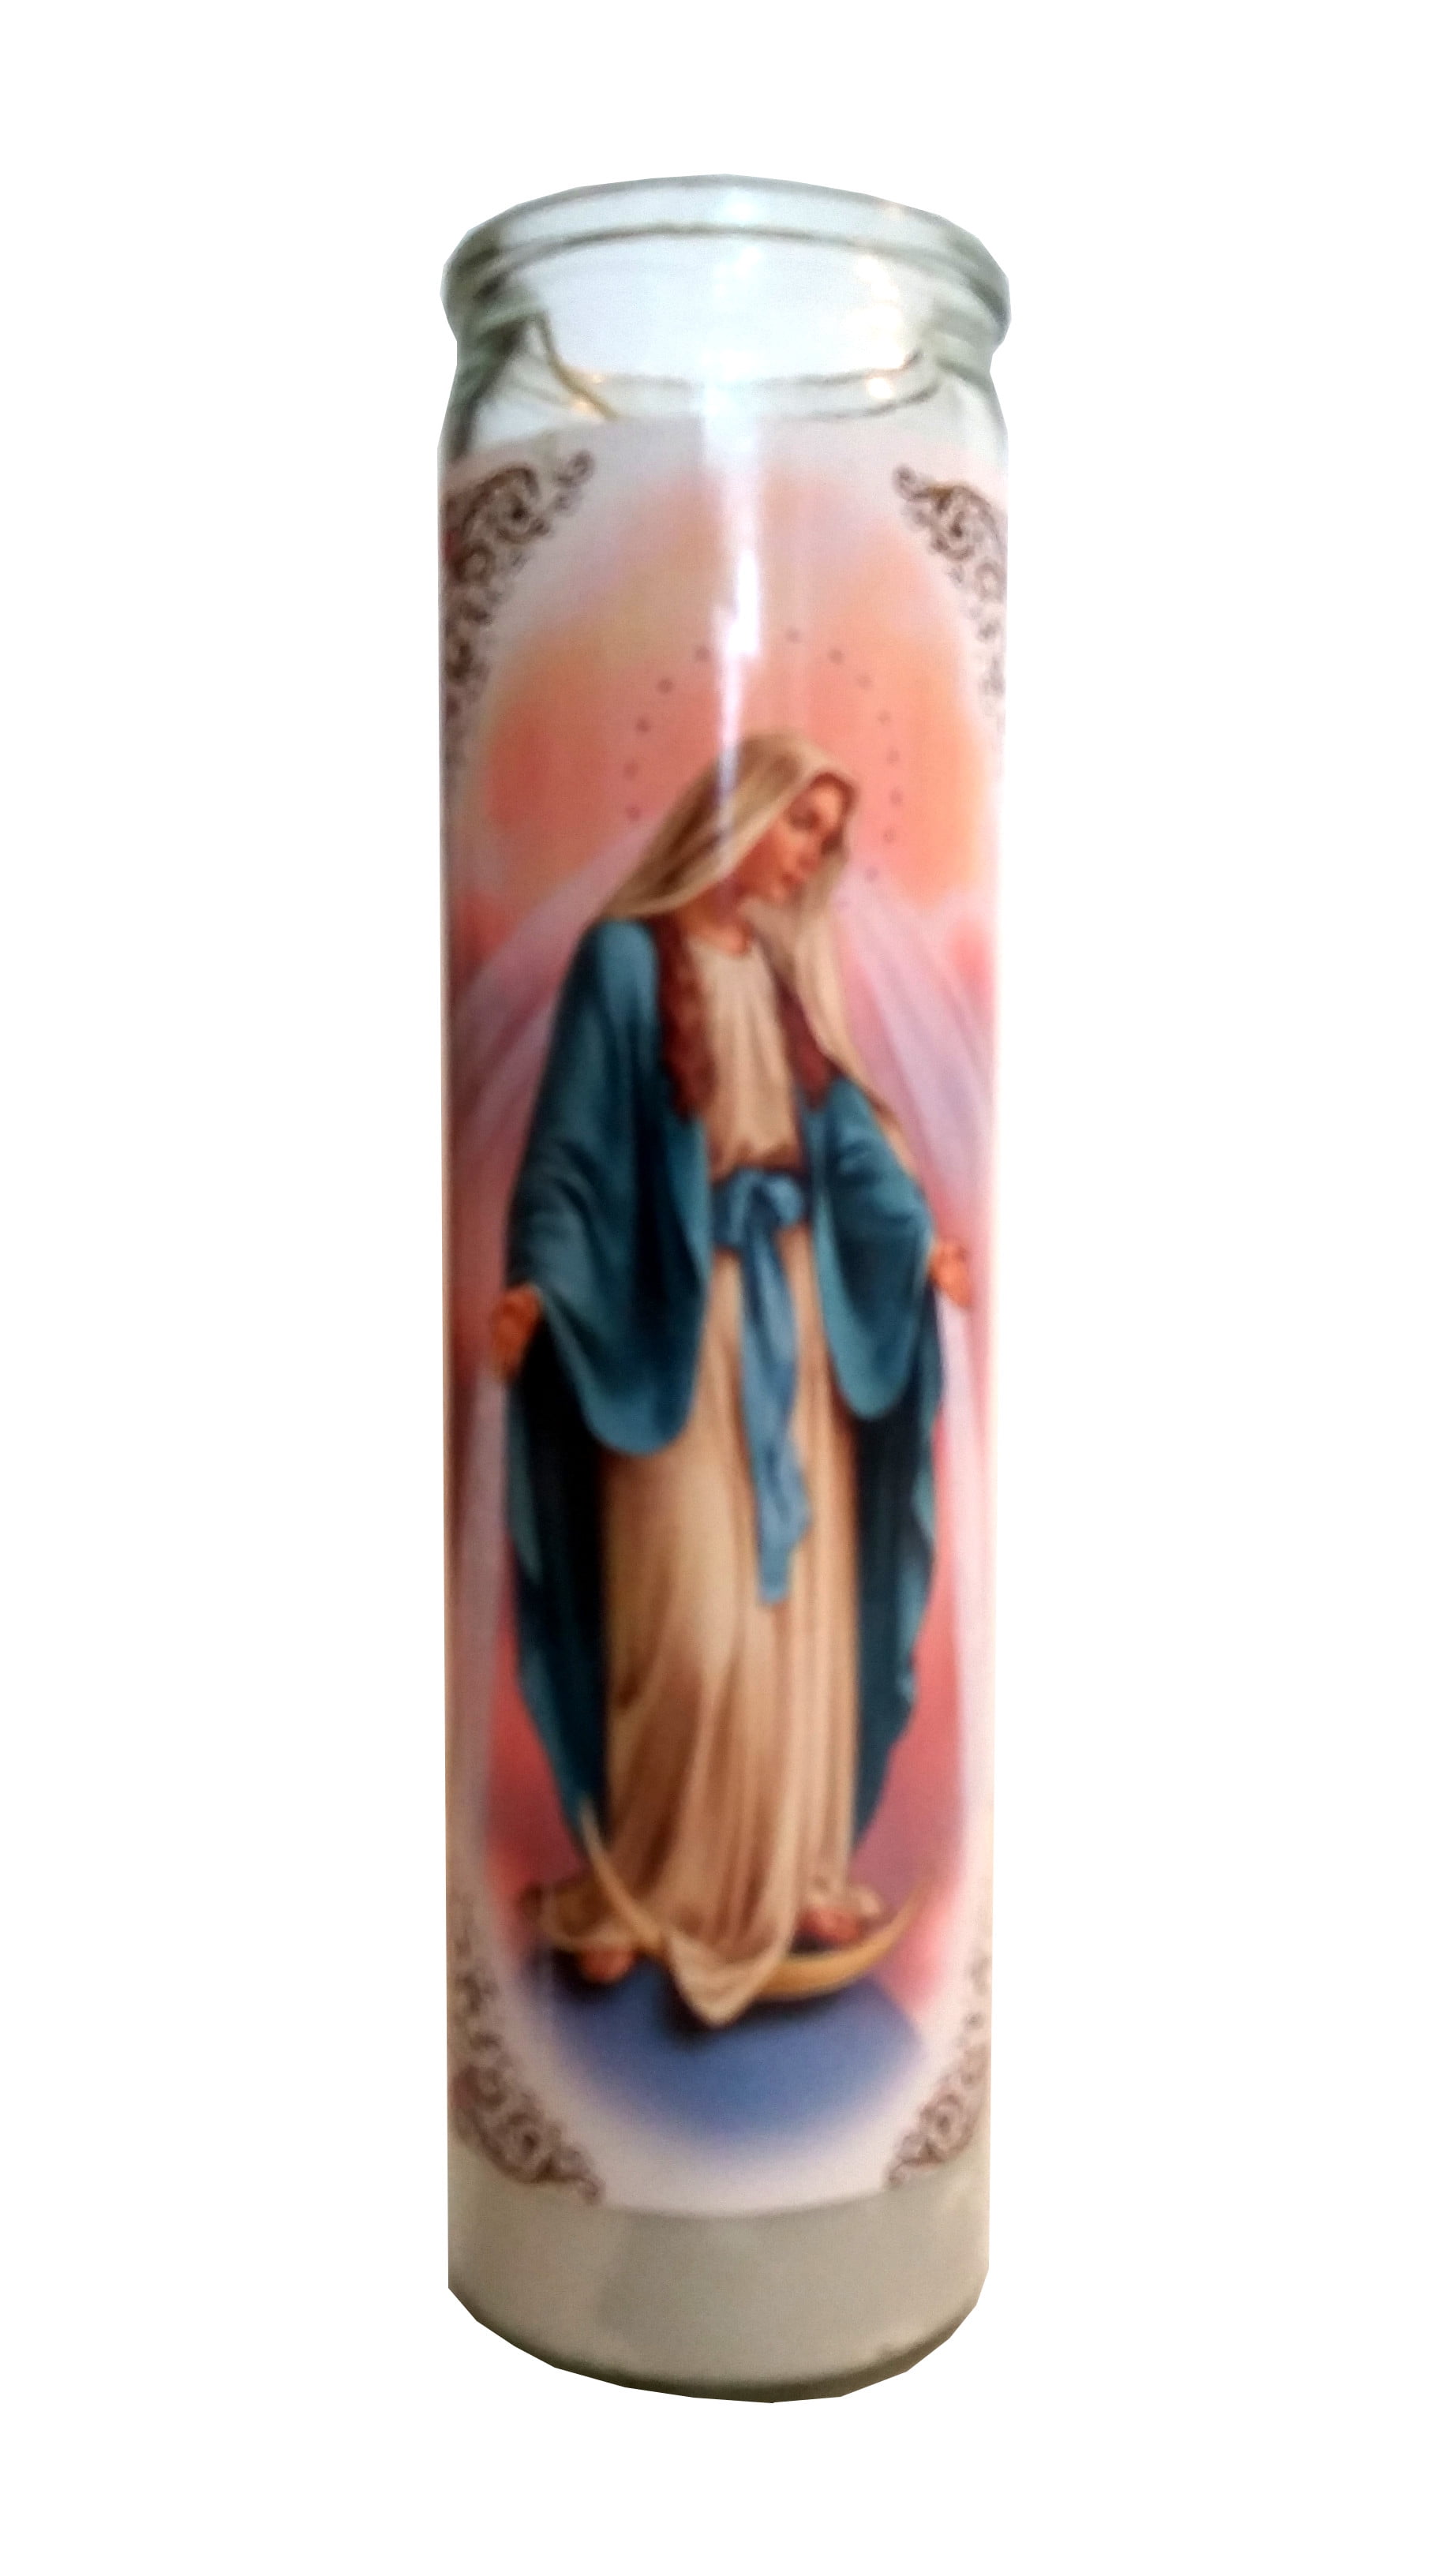 Miraculous Mother Candle (Pack of 6)